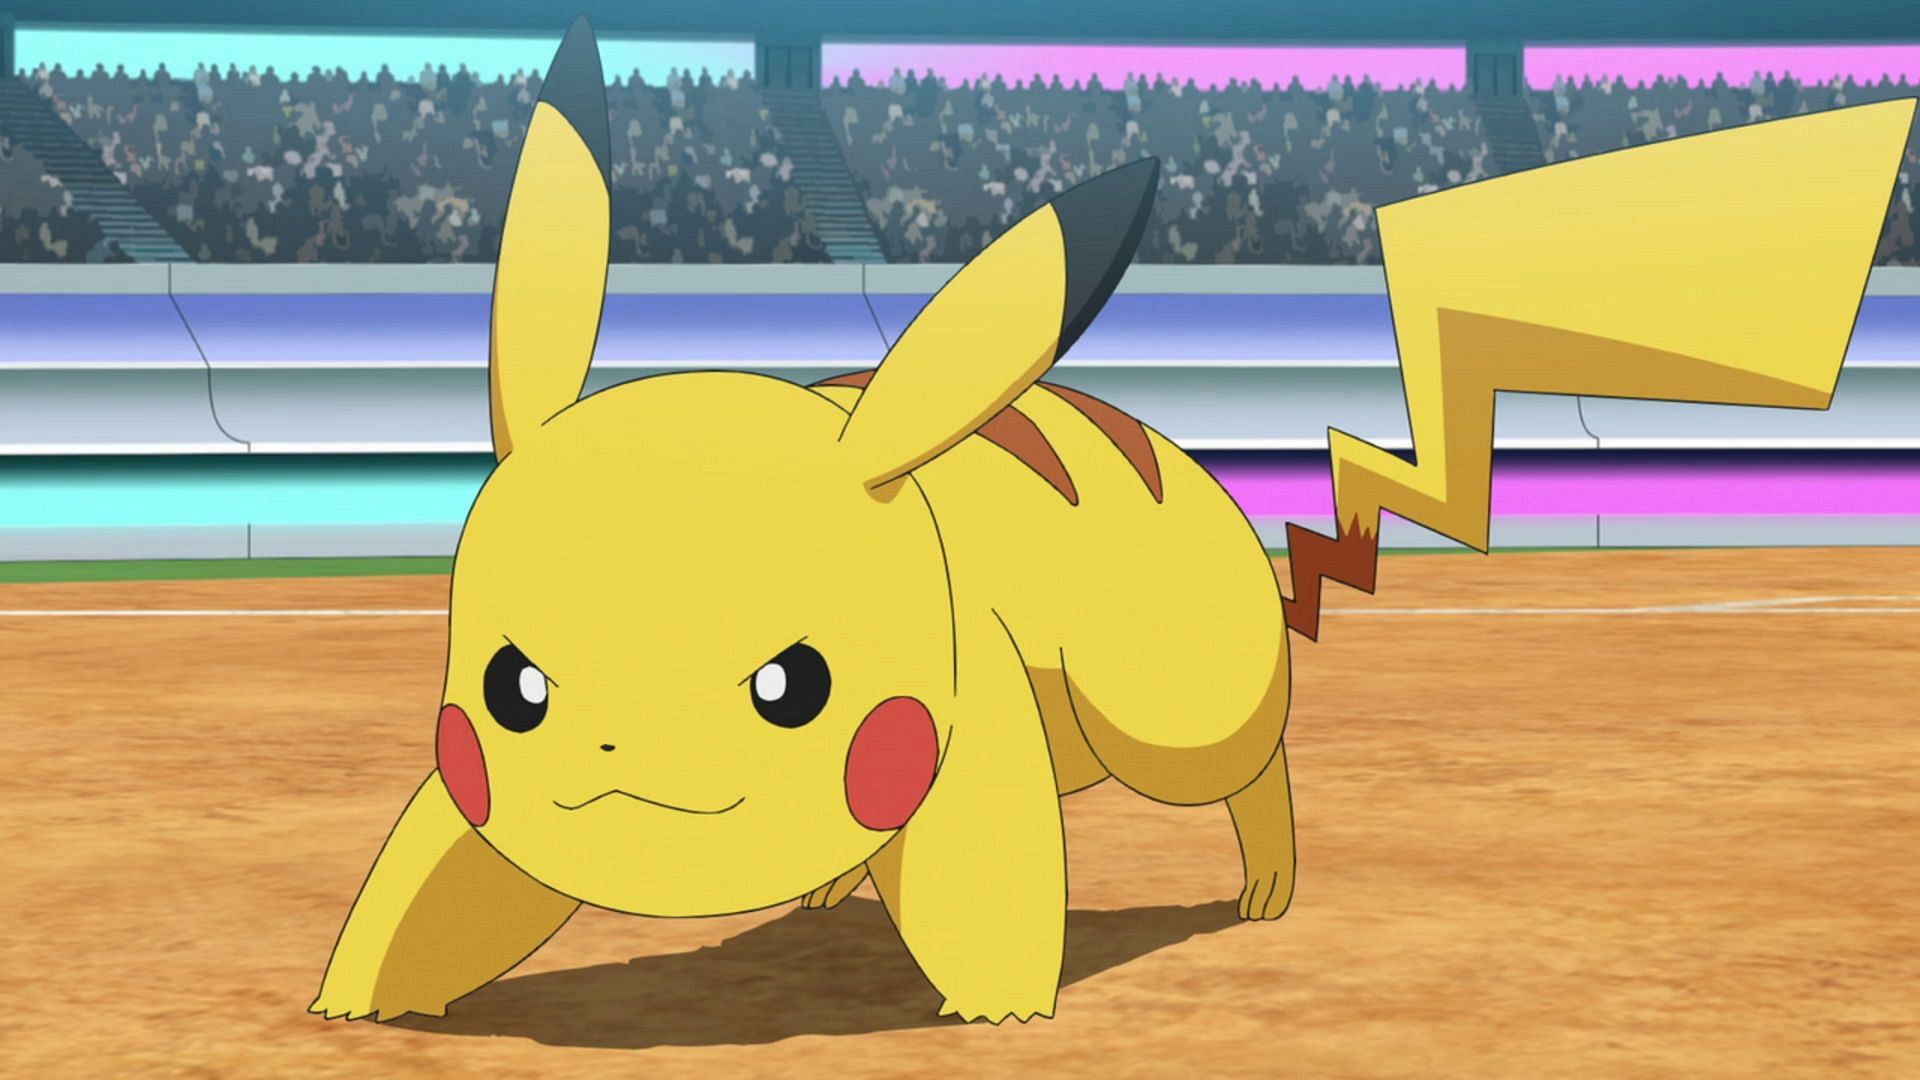 Pokémon: Every Pikachu Look, Ranked From Worst To Best